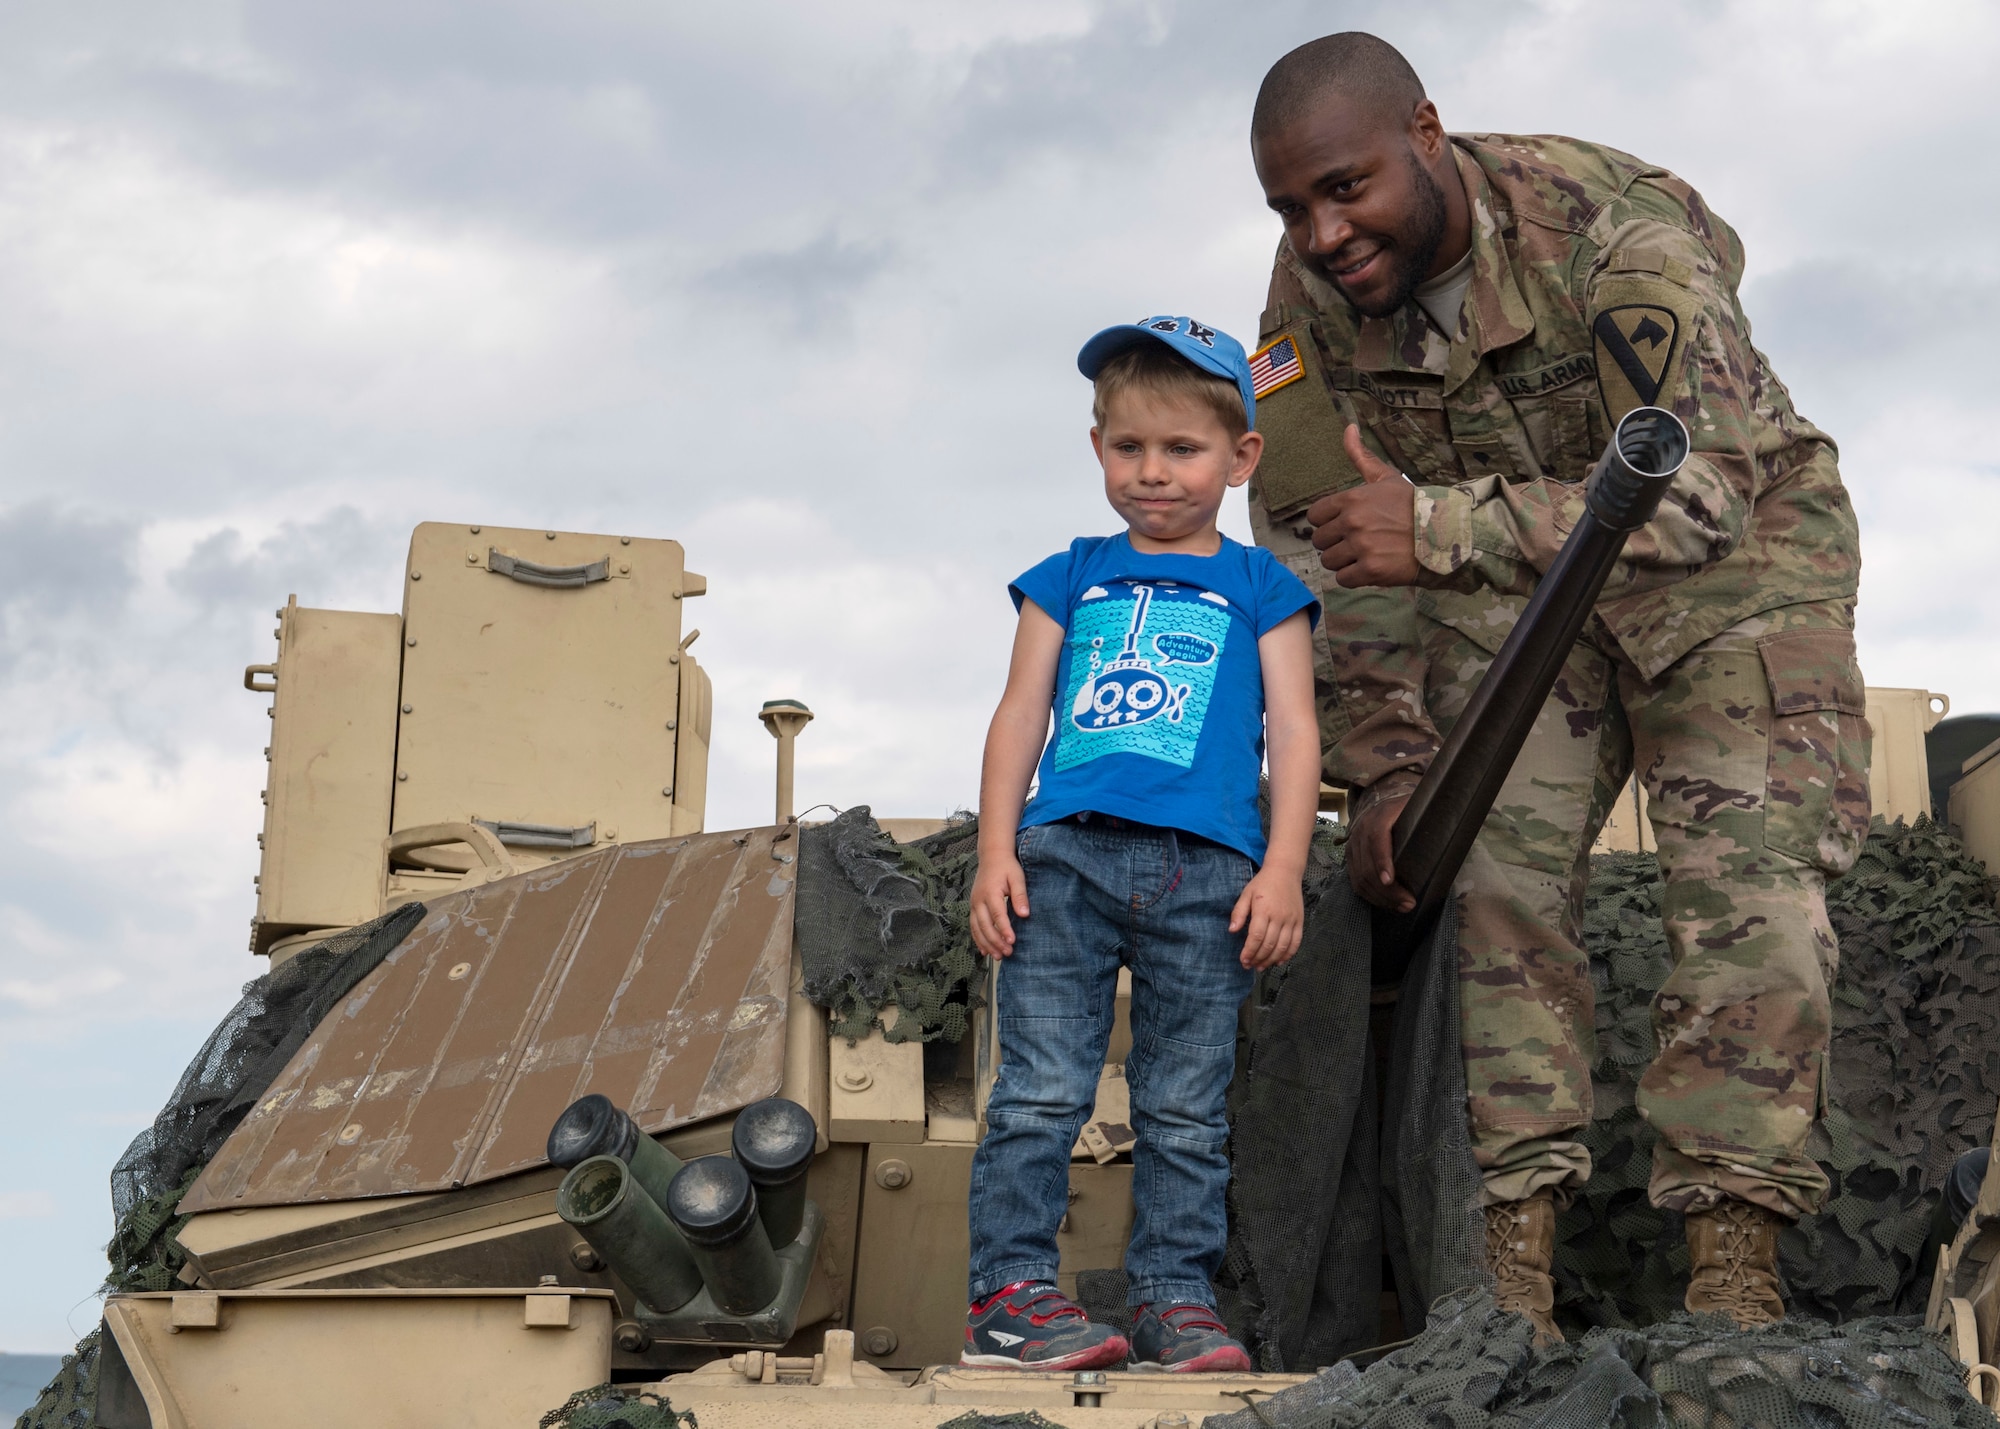 Specialist James Elliott, assigned to Bravo Company, 2-12th Cavalry Regiment, poses for a photo with an air show attendee on top of a Bradley Fighting Vehicle at Ostrava Air Base, Czech Republic, during NATO Days. NATO Days is a Czech Republic-led air show and exhibition that showcases military ground and aviation capabilities from 19 nations. Participation in NATO Days increases our understanding of European ally and partner capabilities, greatly enhancing our ability to operate together as a team. (U.S. Navy photo by Mass Communication Specialist 2nd Class Robert J. Baldock)